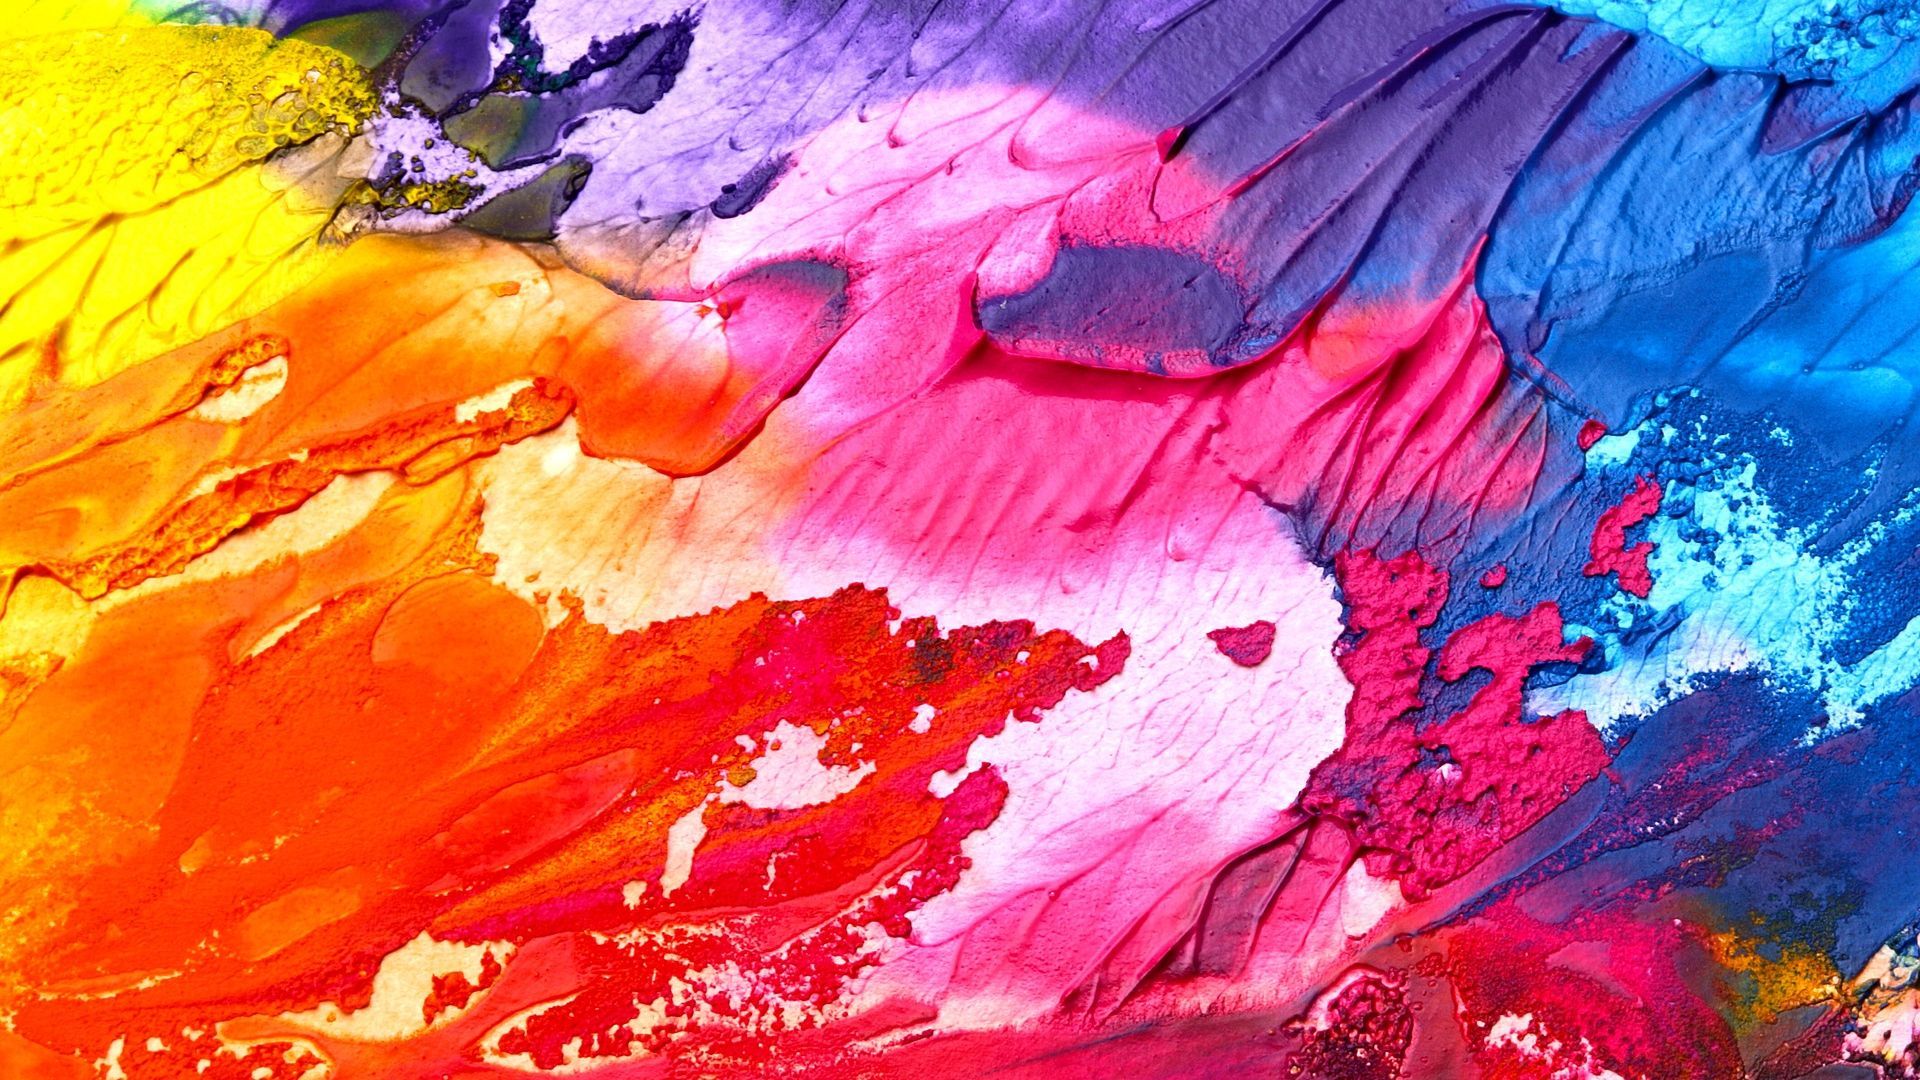 Colorful Paint Abstract Art HD Wallpaper Image High Quality